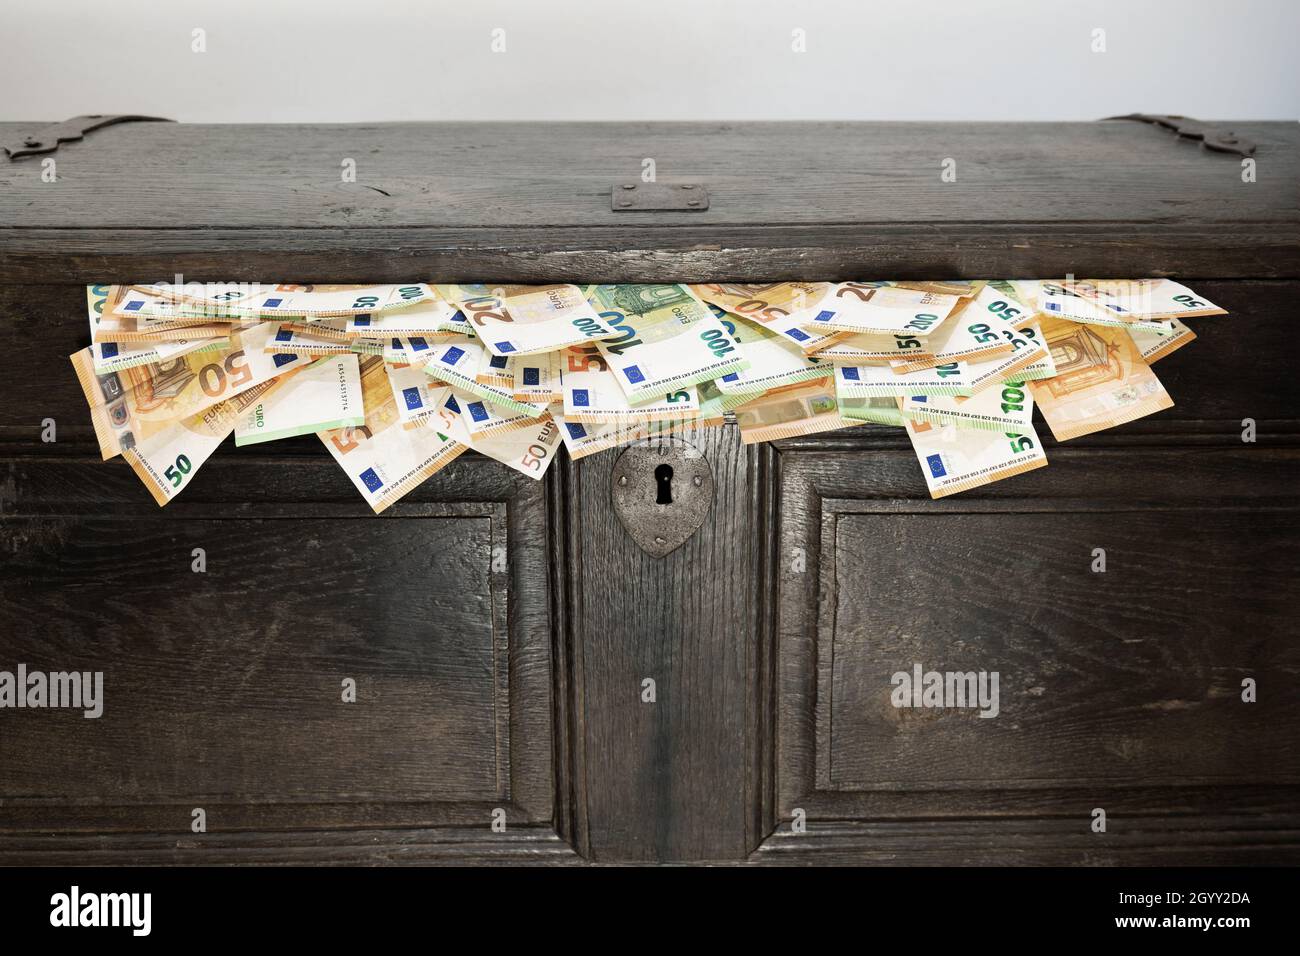 Antique wooden chest from which euro bills spill out. Savings, black money, cash, cash flow. Stock Photo